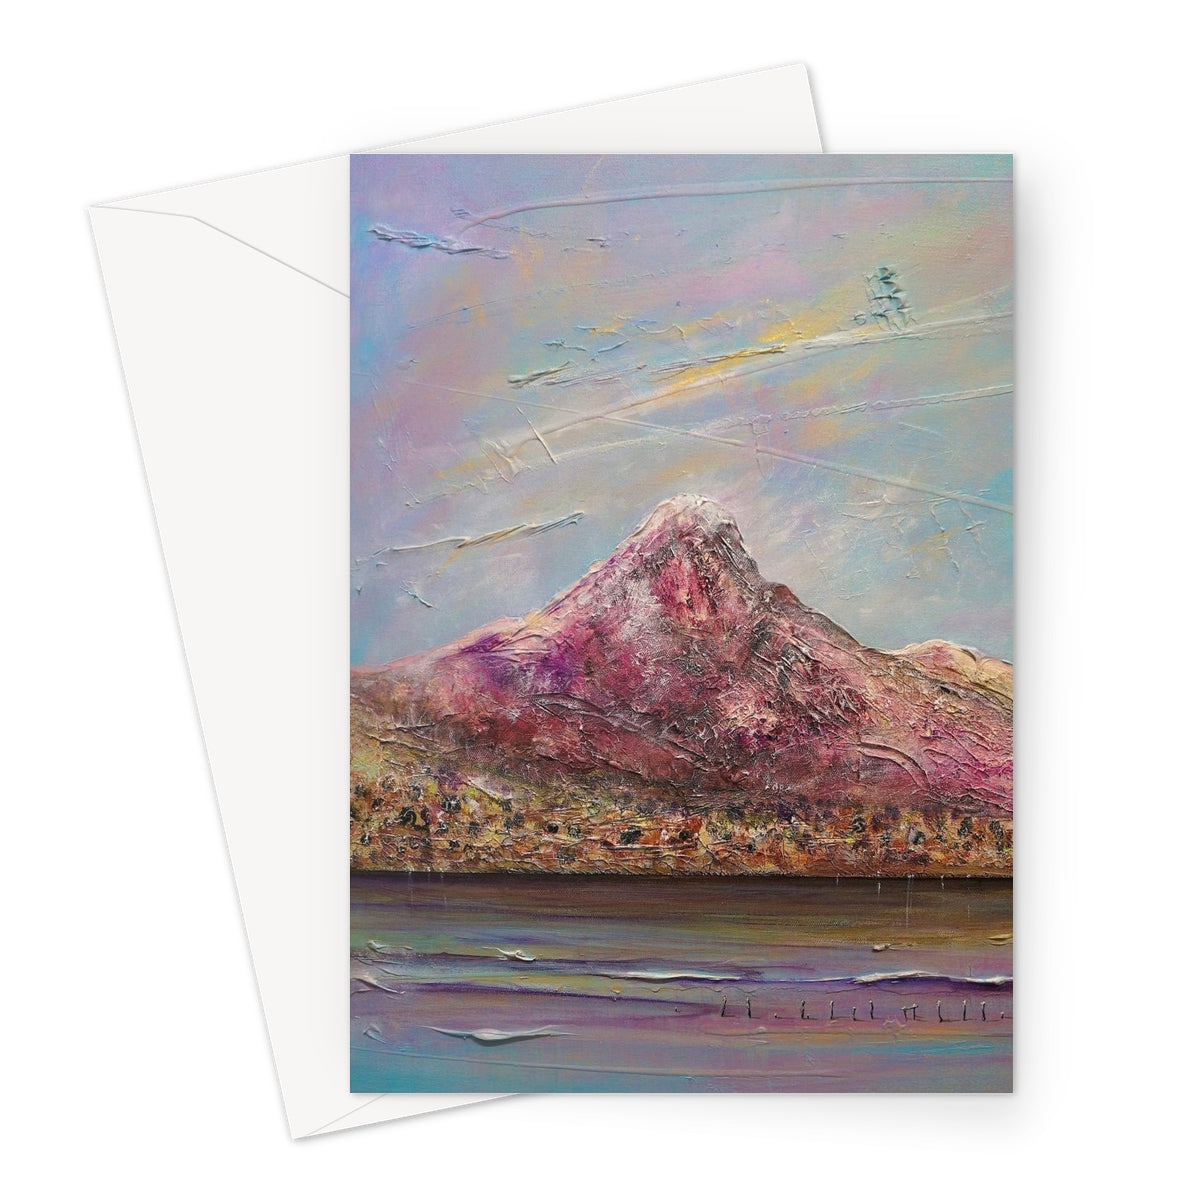 Ben Lomond Art Gifts Greeting Card-Stationery-Scottish Lochs & Mountains Art Gallery-A5 Portrait-1 Card-Paintings, Prints, Homeware, Art Gifts From Scotland By Scottish Artist Kevin Hunter